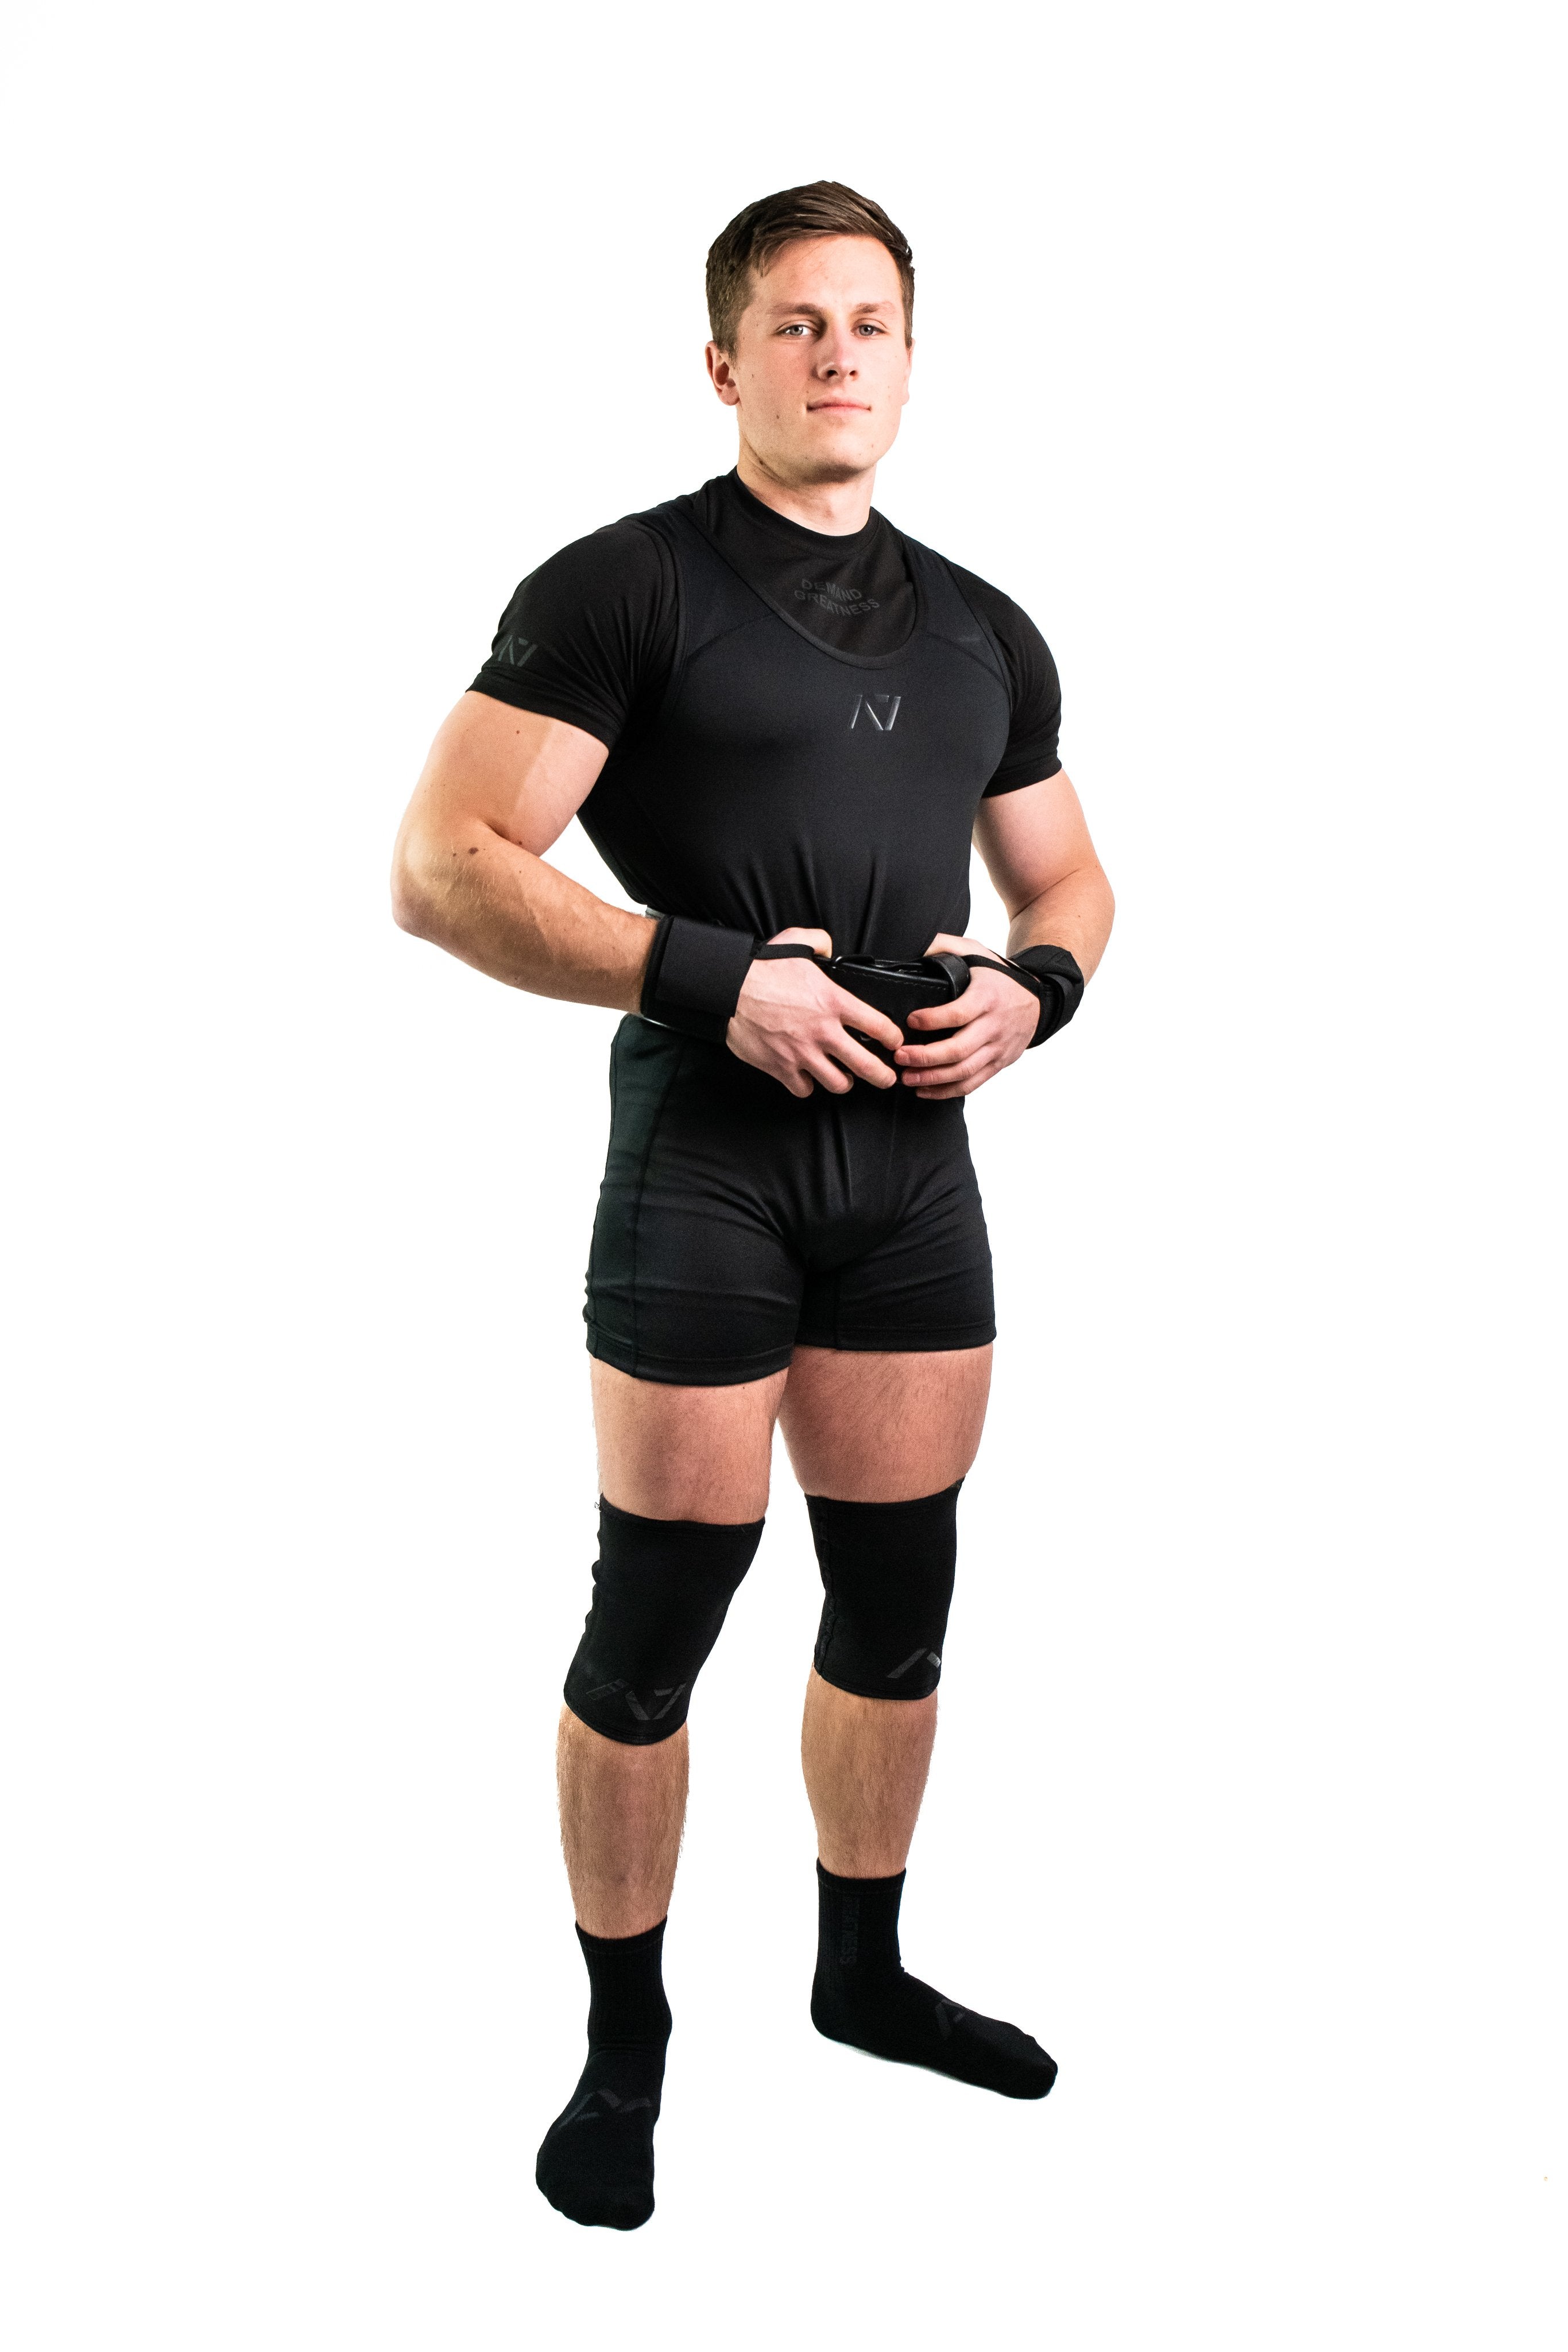 A7 IPF Approved Powerlifting Singlet is designed exclusively for powerlifting. It is very comfortable to wear and feels soft on bare skin. A7 Powerlifting Singlet is made from breathable fabric and provides compression during your lifts. The perfect piece of IPF Approved Kit! A7 UK shipping to UK and Europe.